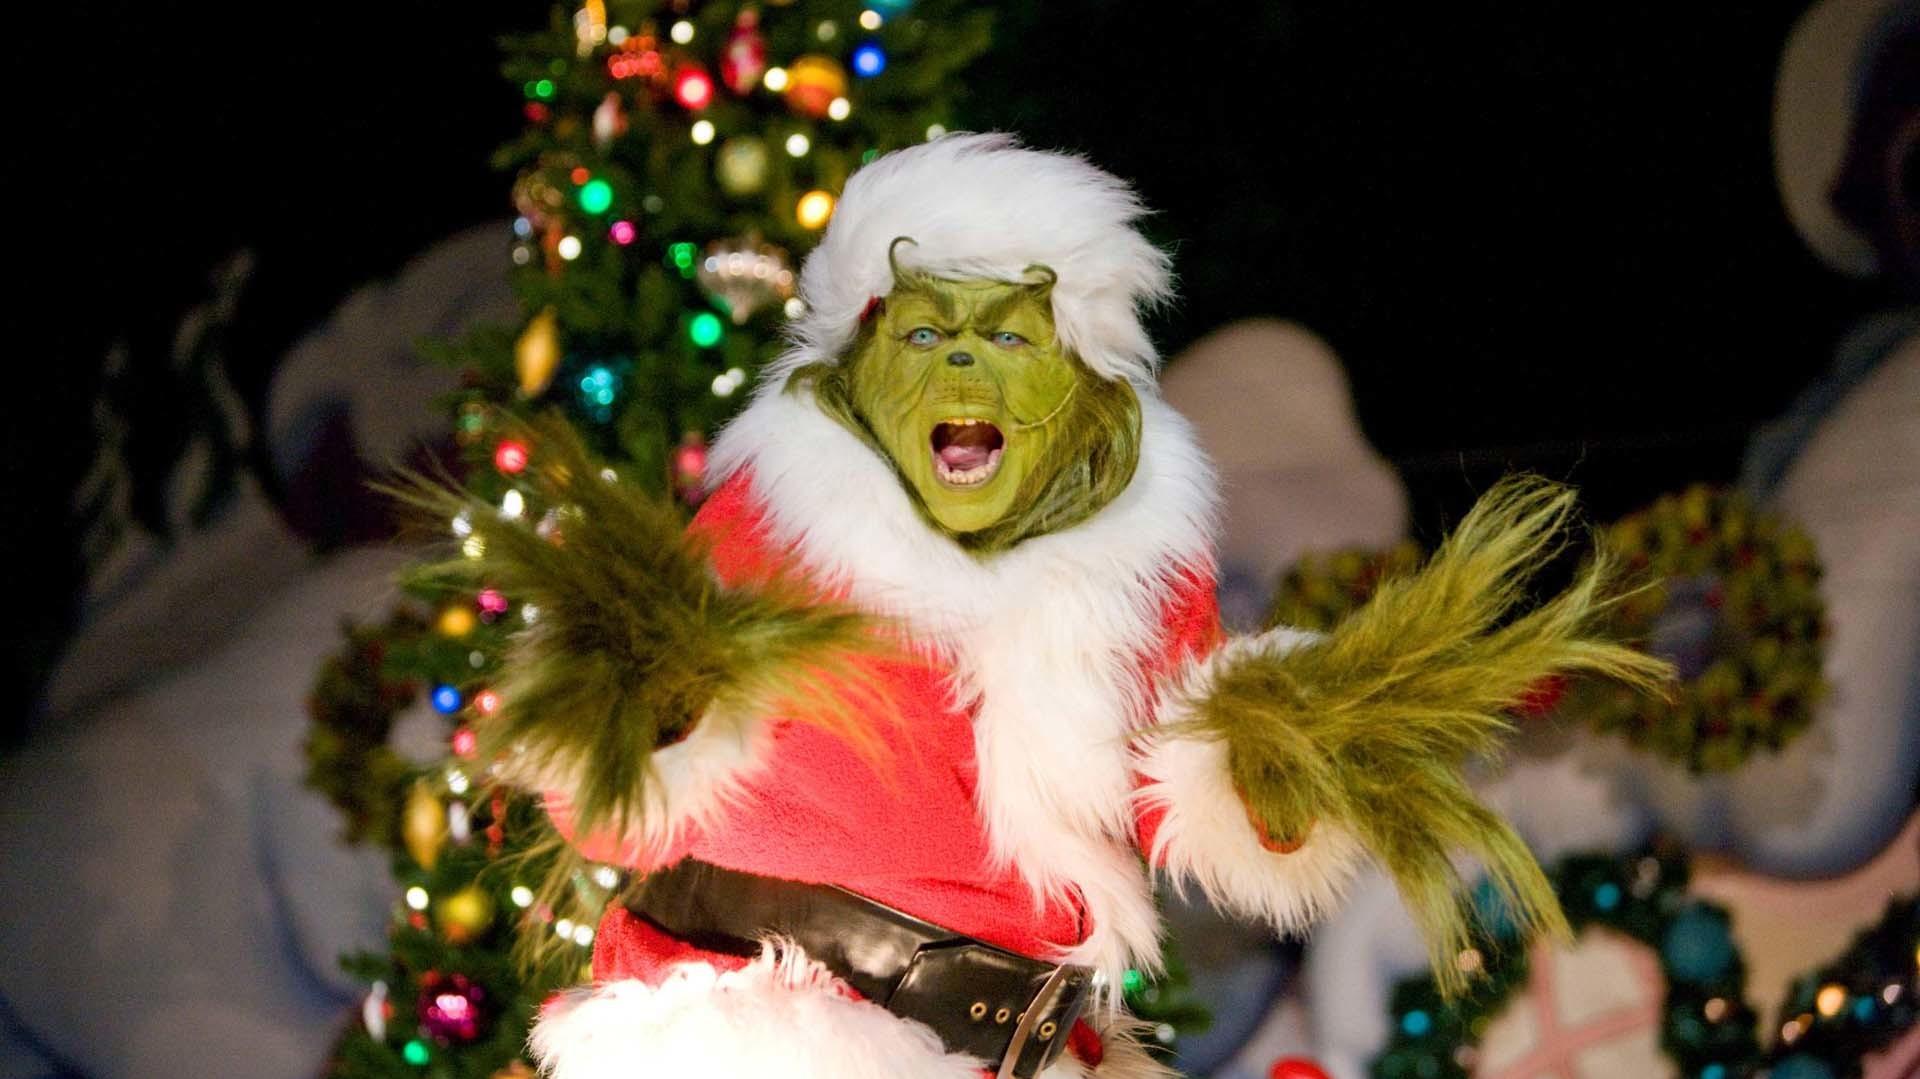 The Grinch Wallpaper Pictures